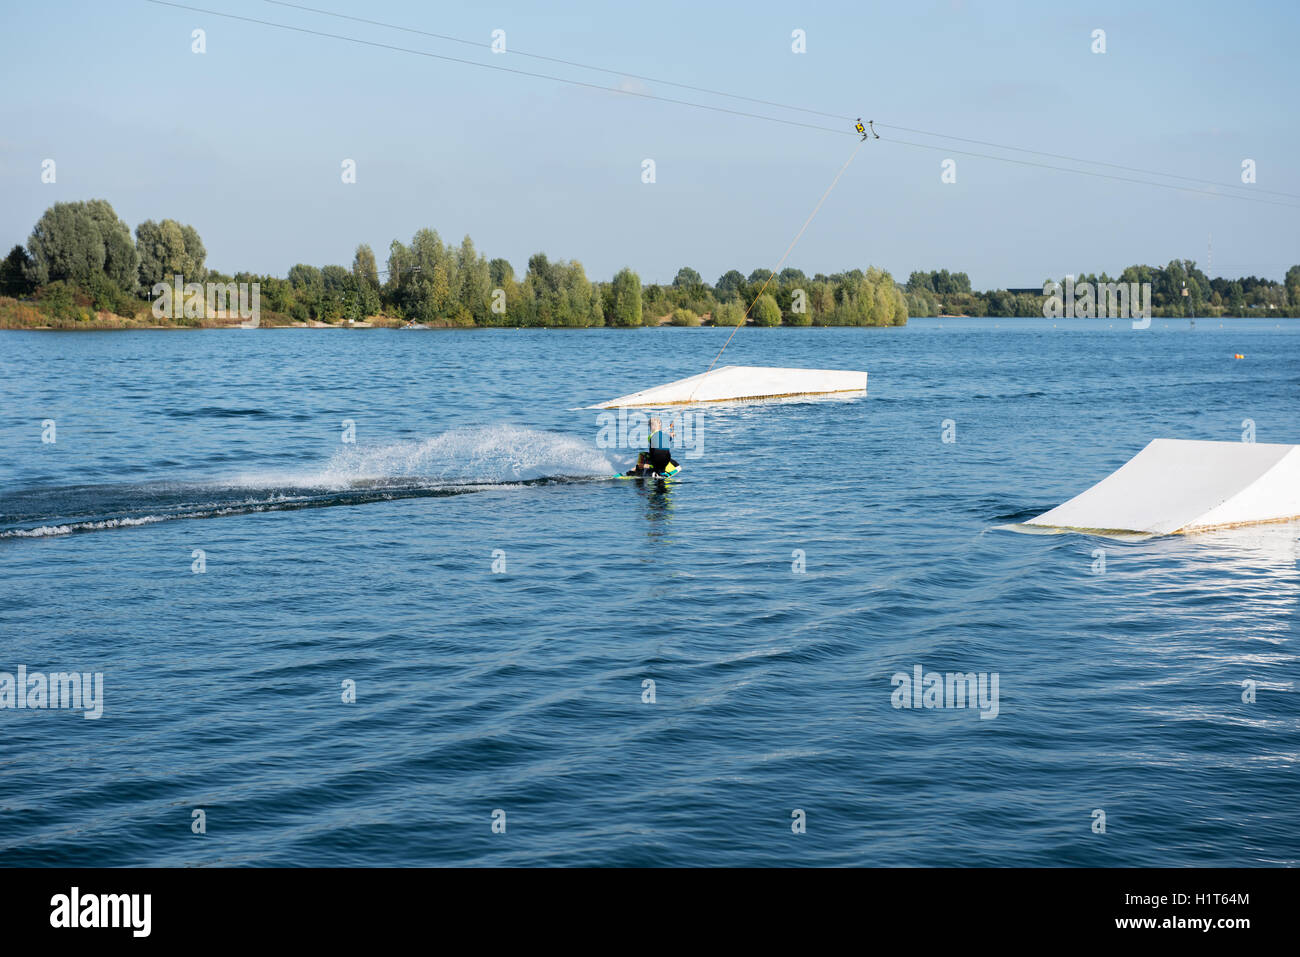 young boy is making a big wave with his wakeboard Stock Photo